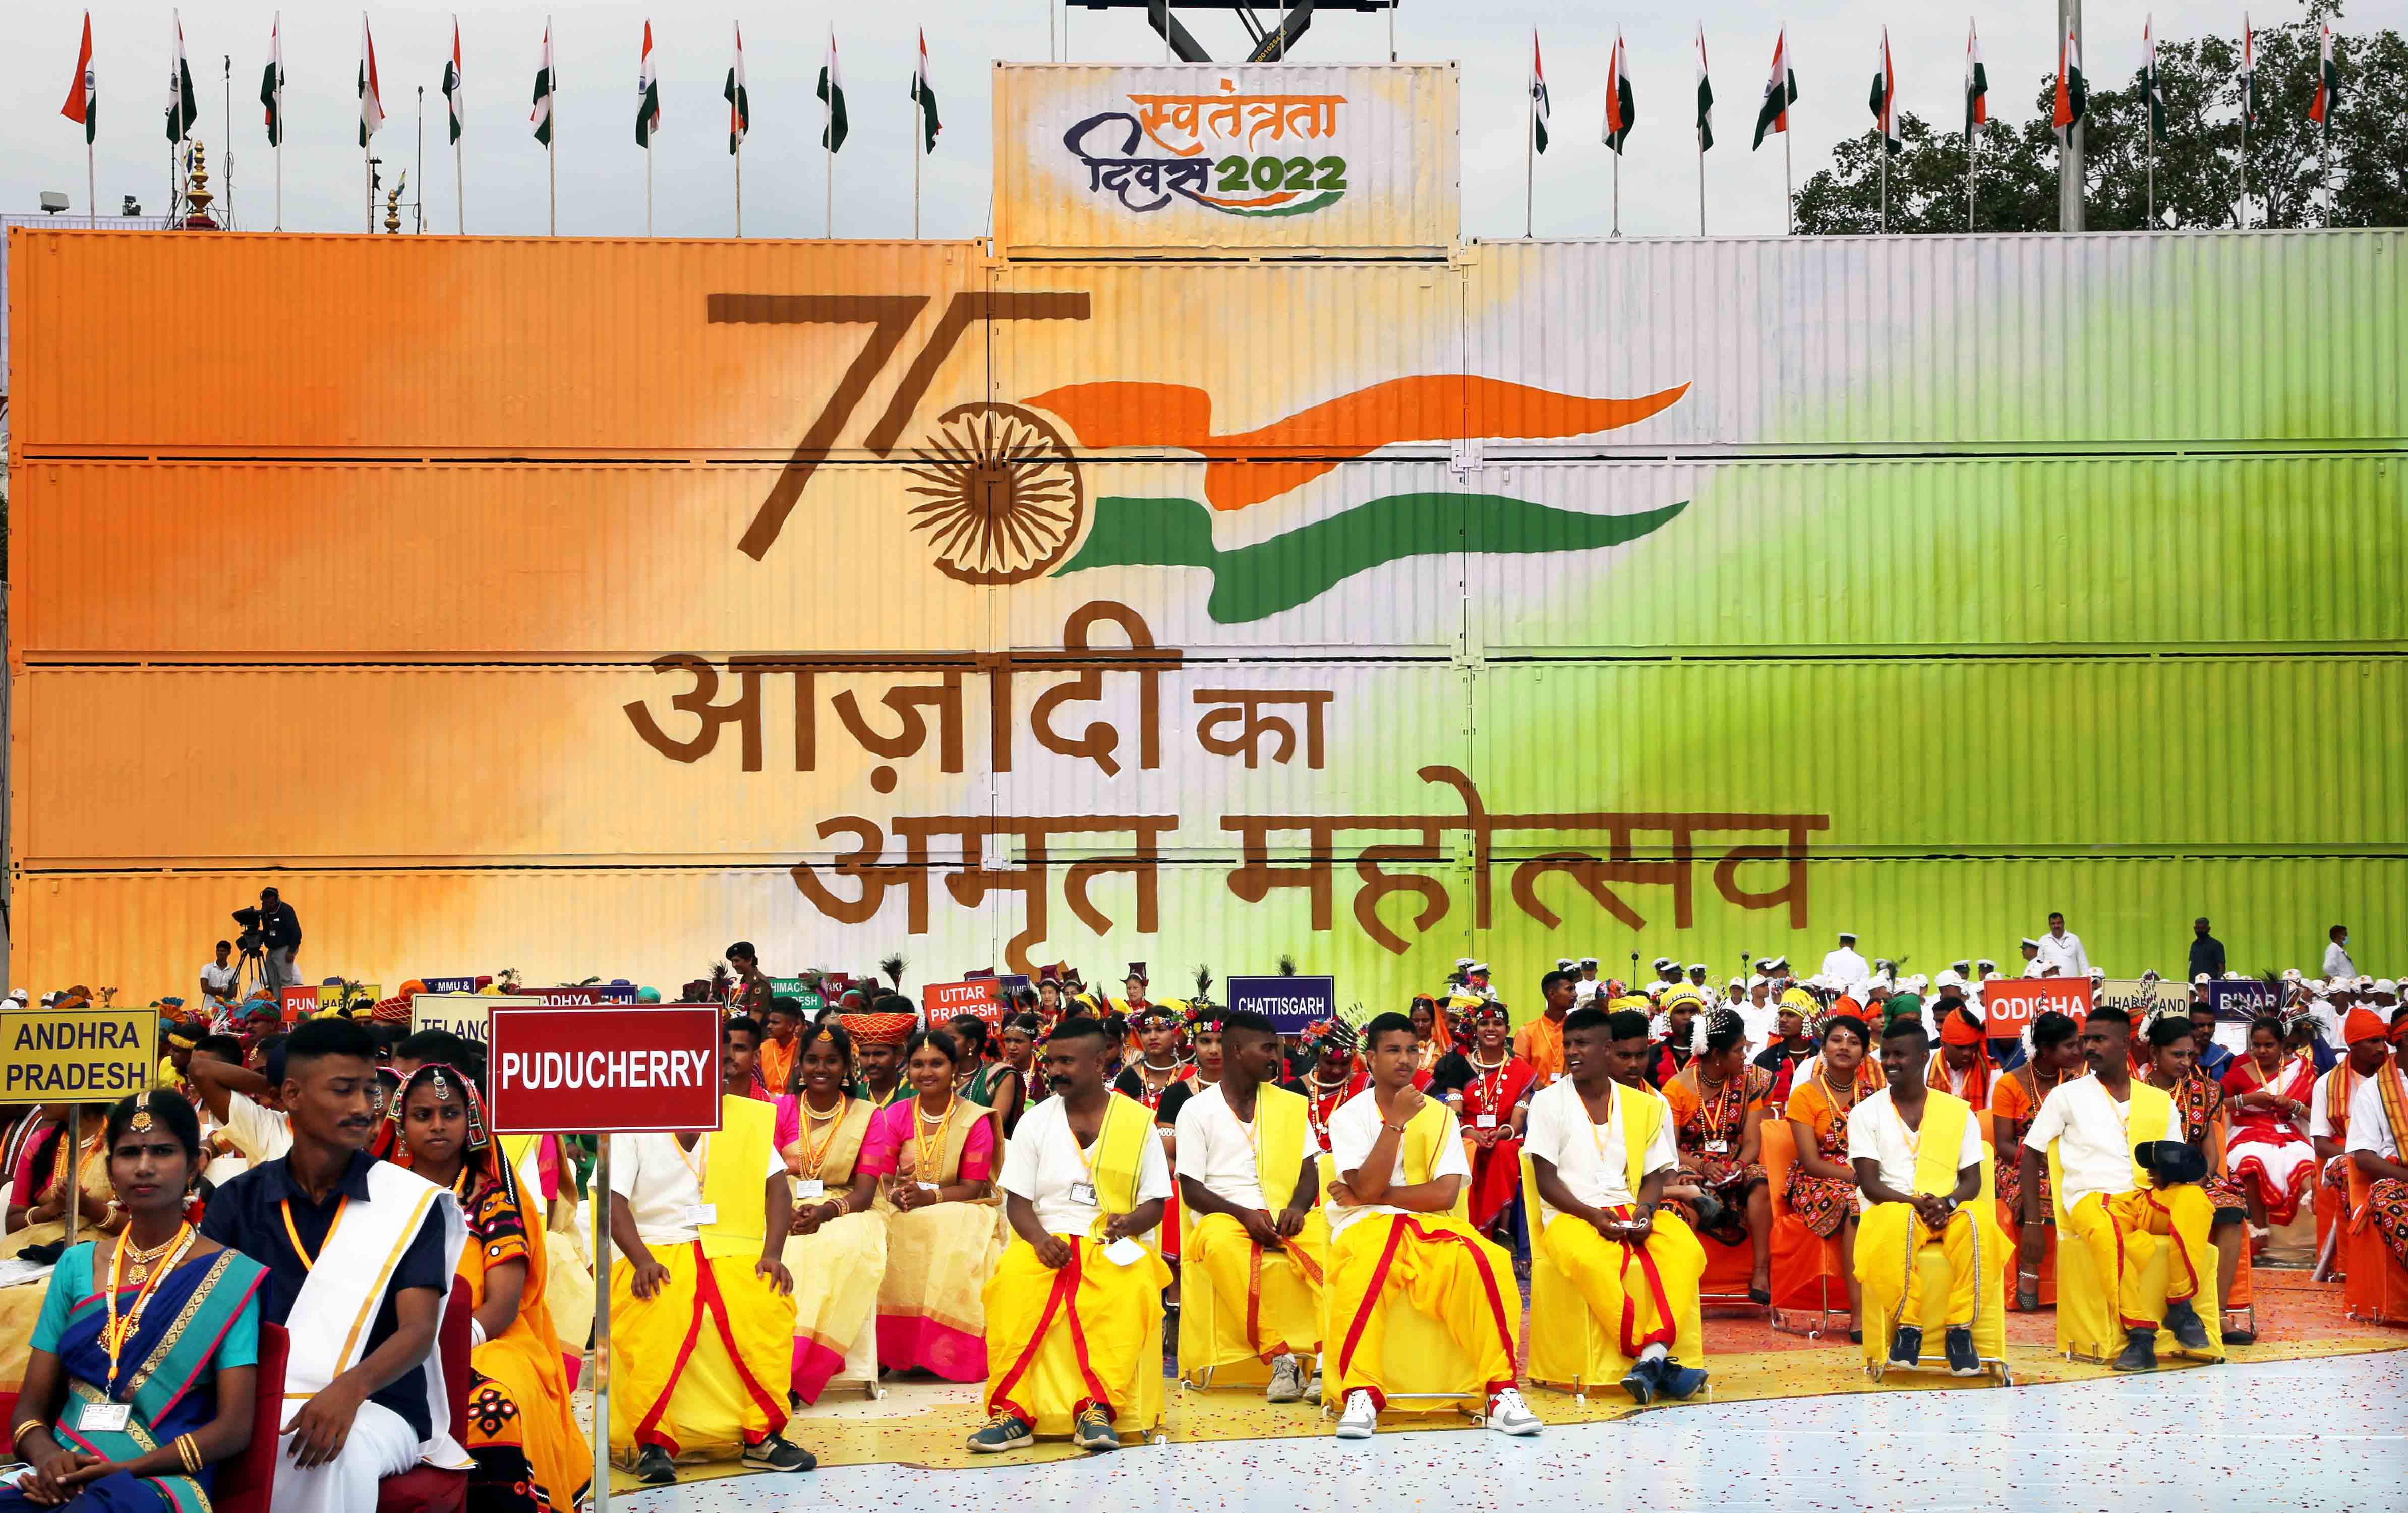 INDEPENDENCE DAY CELEBRATIONS 2022 (I) | Ministry of Defence